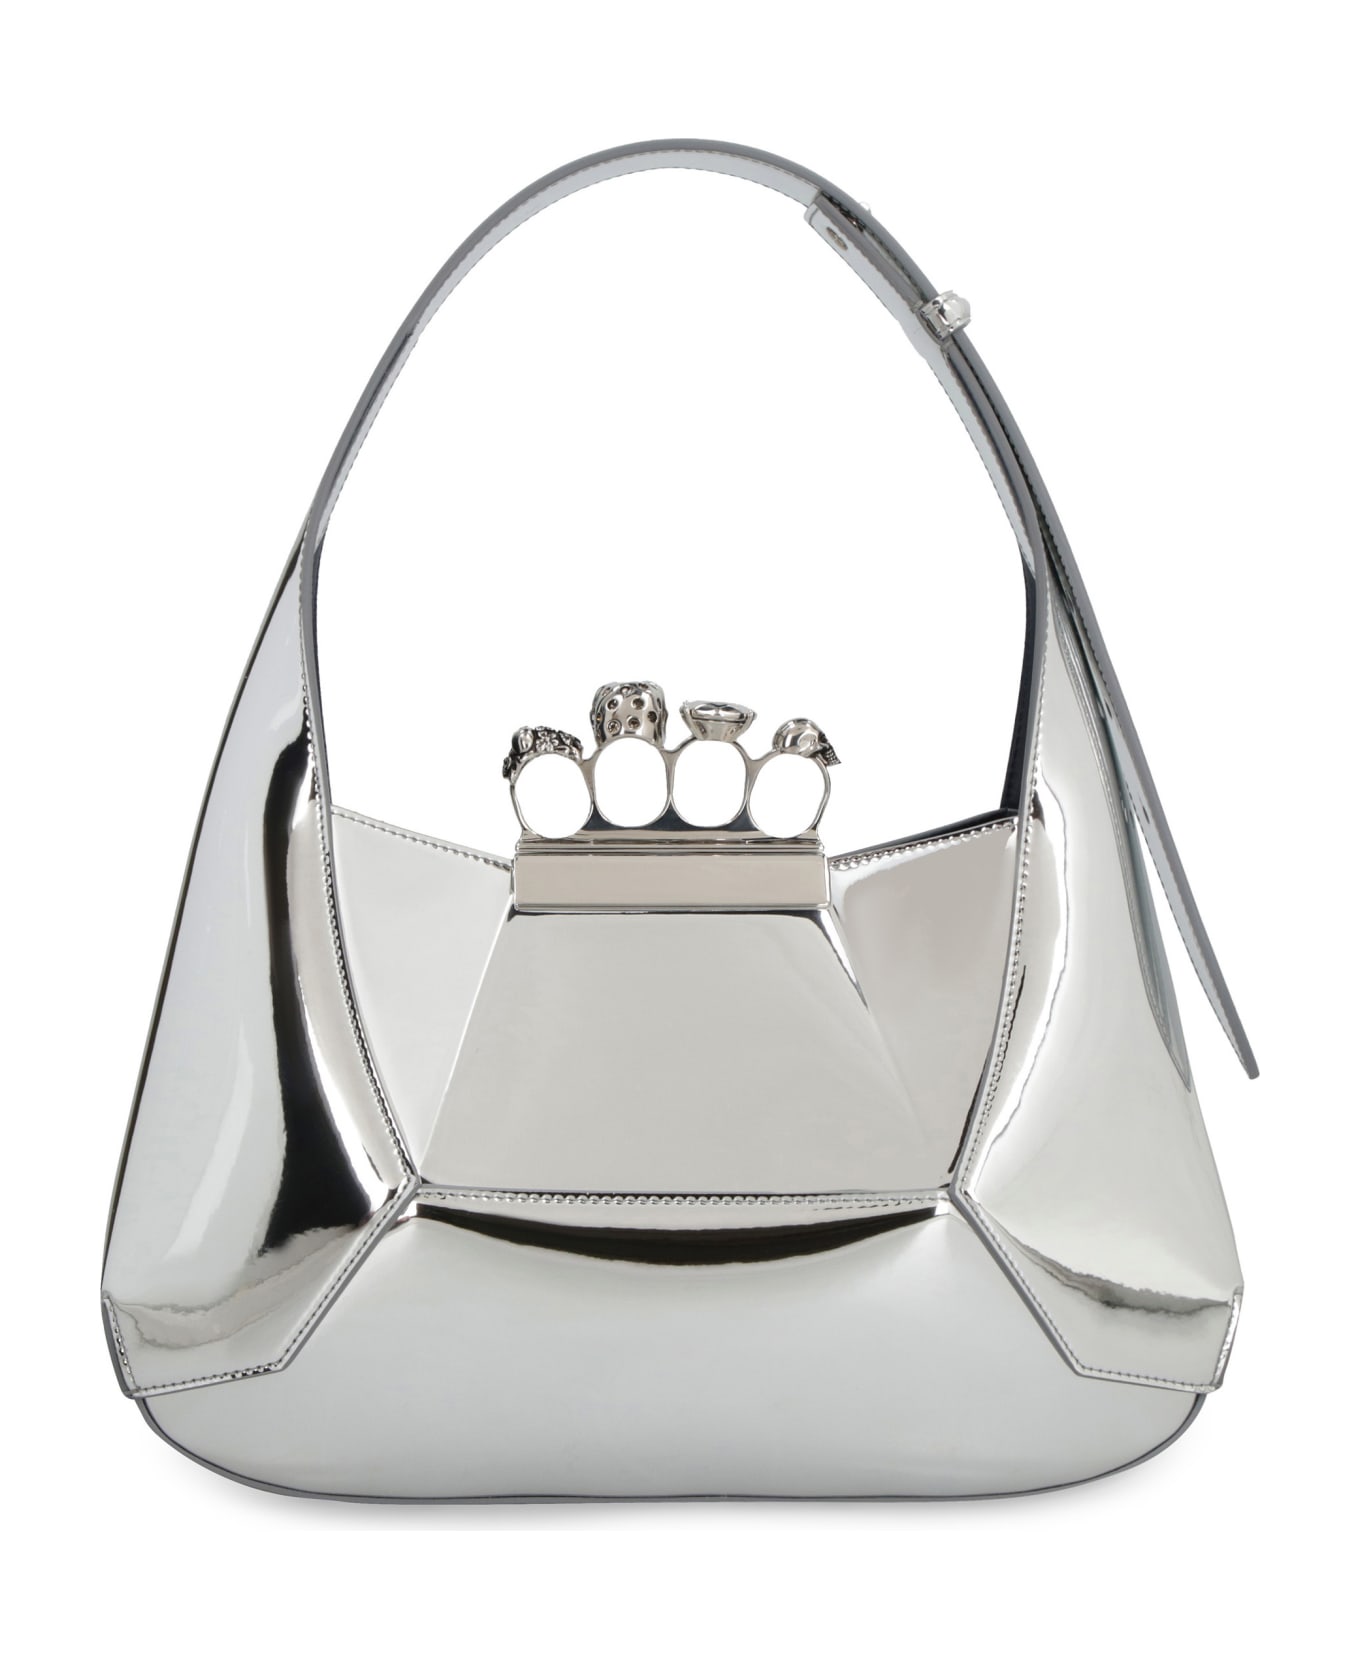 Alexander McQueen Hobo Bag With Four Rings Detail - silver トートバッグ